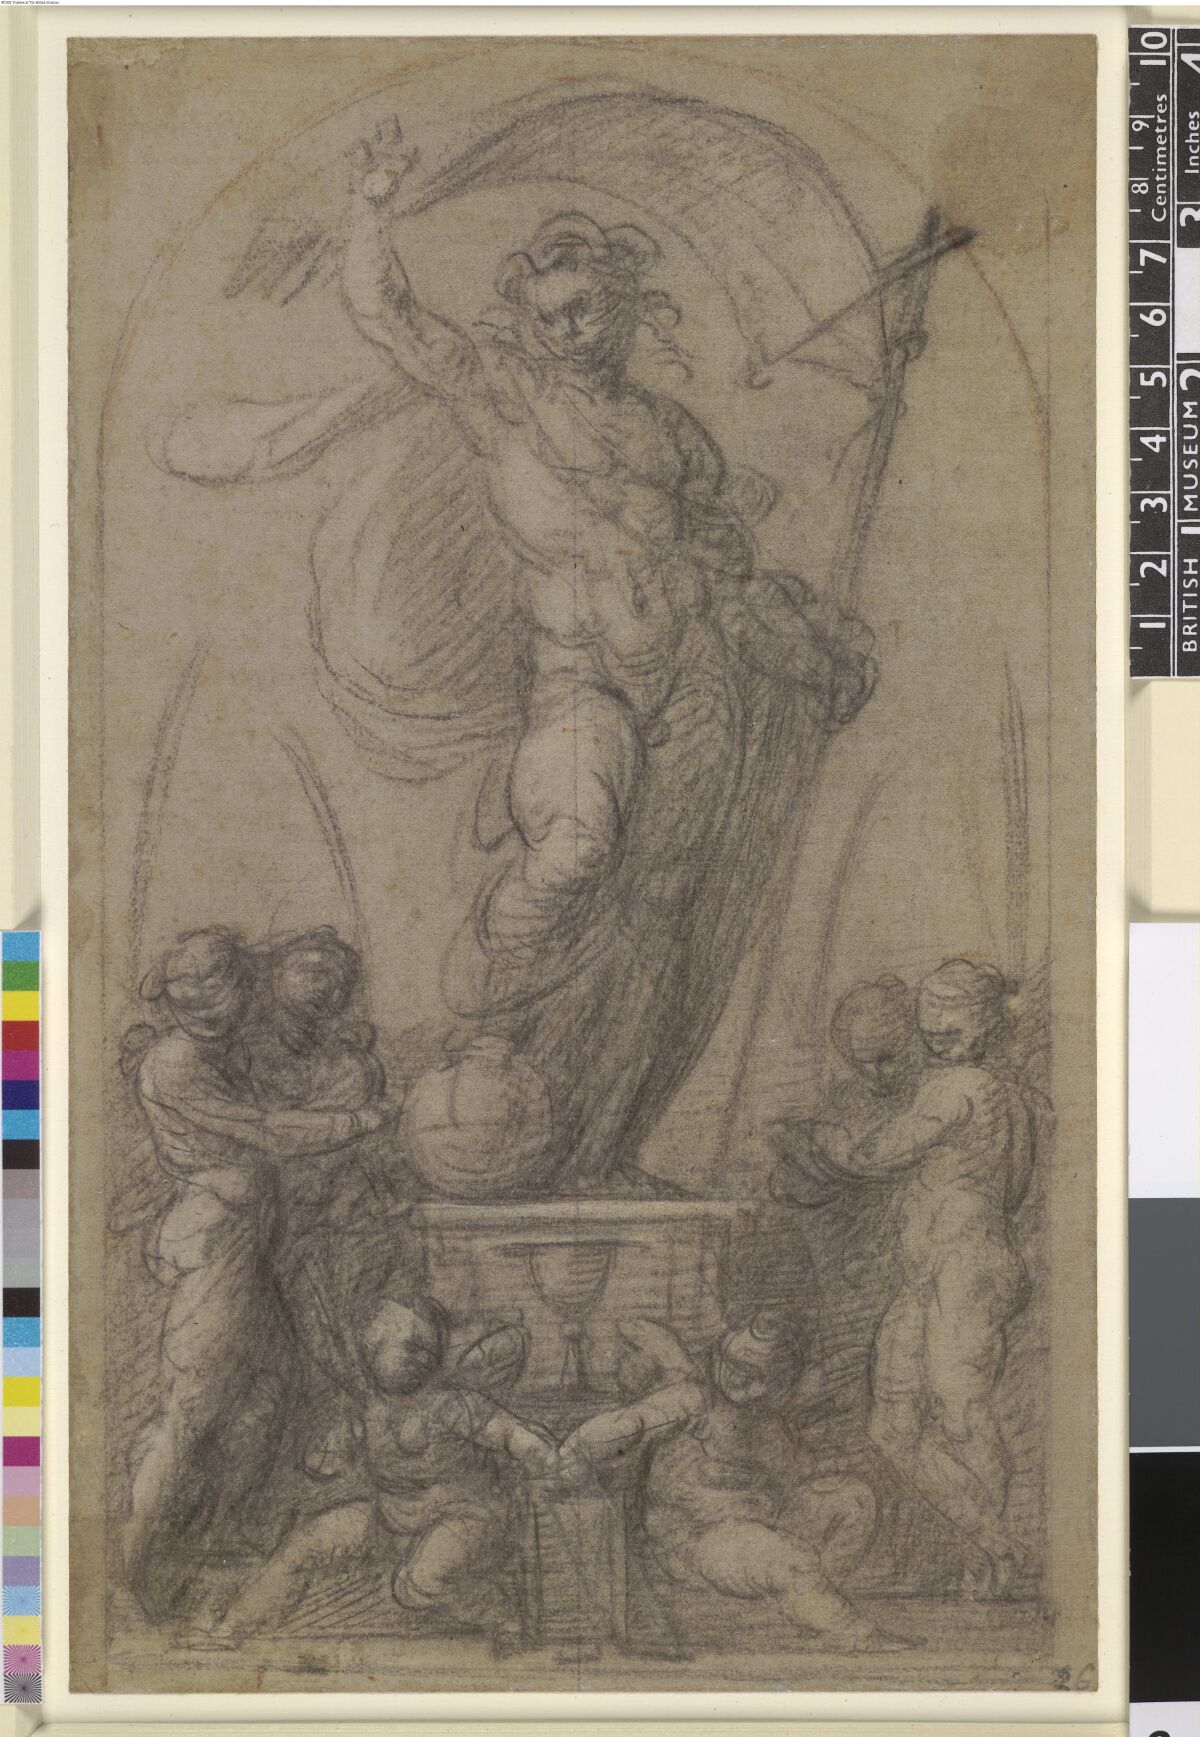 'Masterpieces of Italian Drawings' from The British Museum